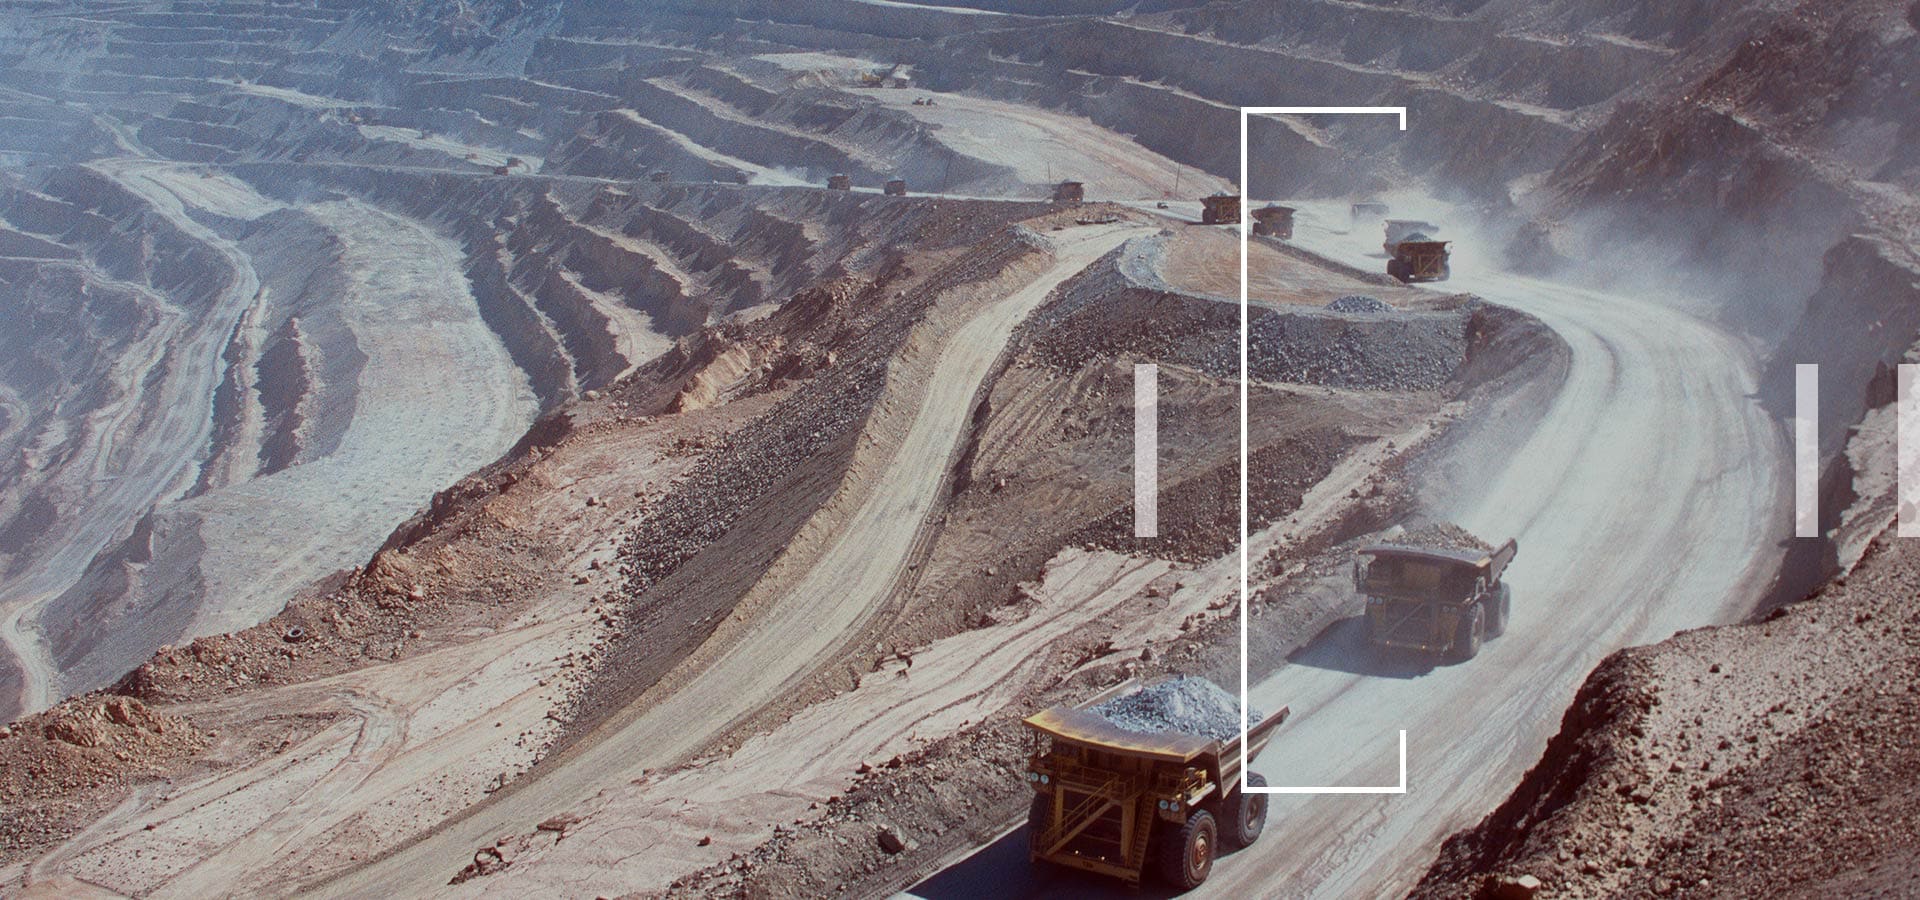 Road feature recognition from aerial imagery for a global mining company